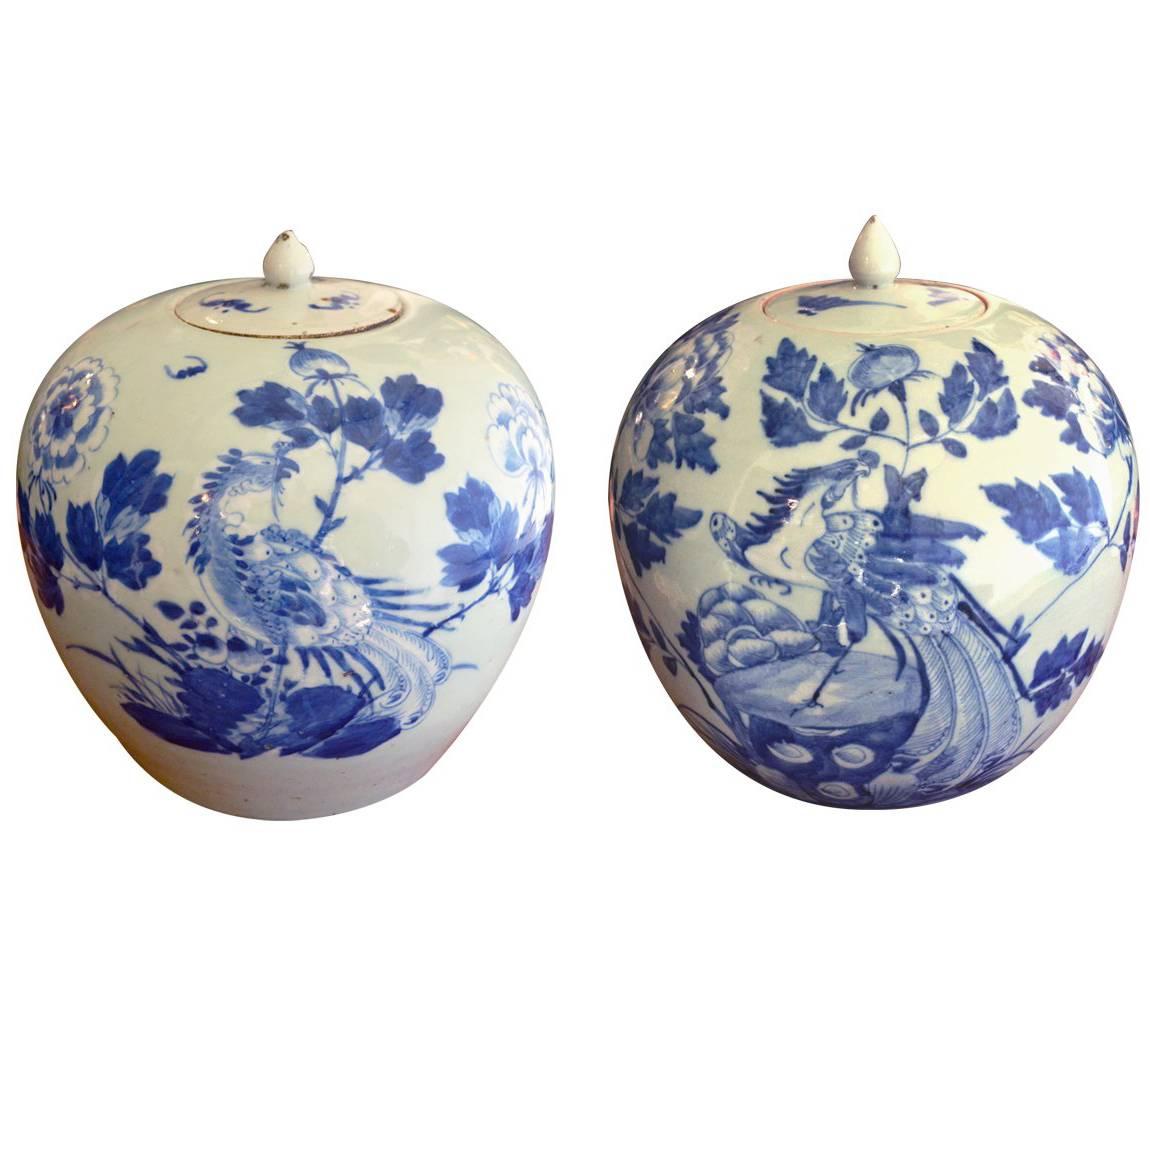 Antique Matching Pair of Chinese Blue and White Porcelain Jars/Urns